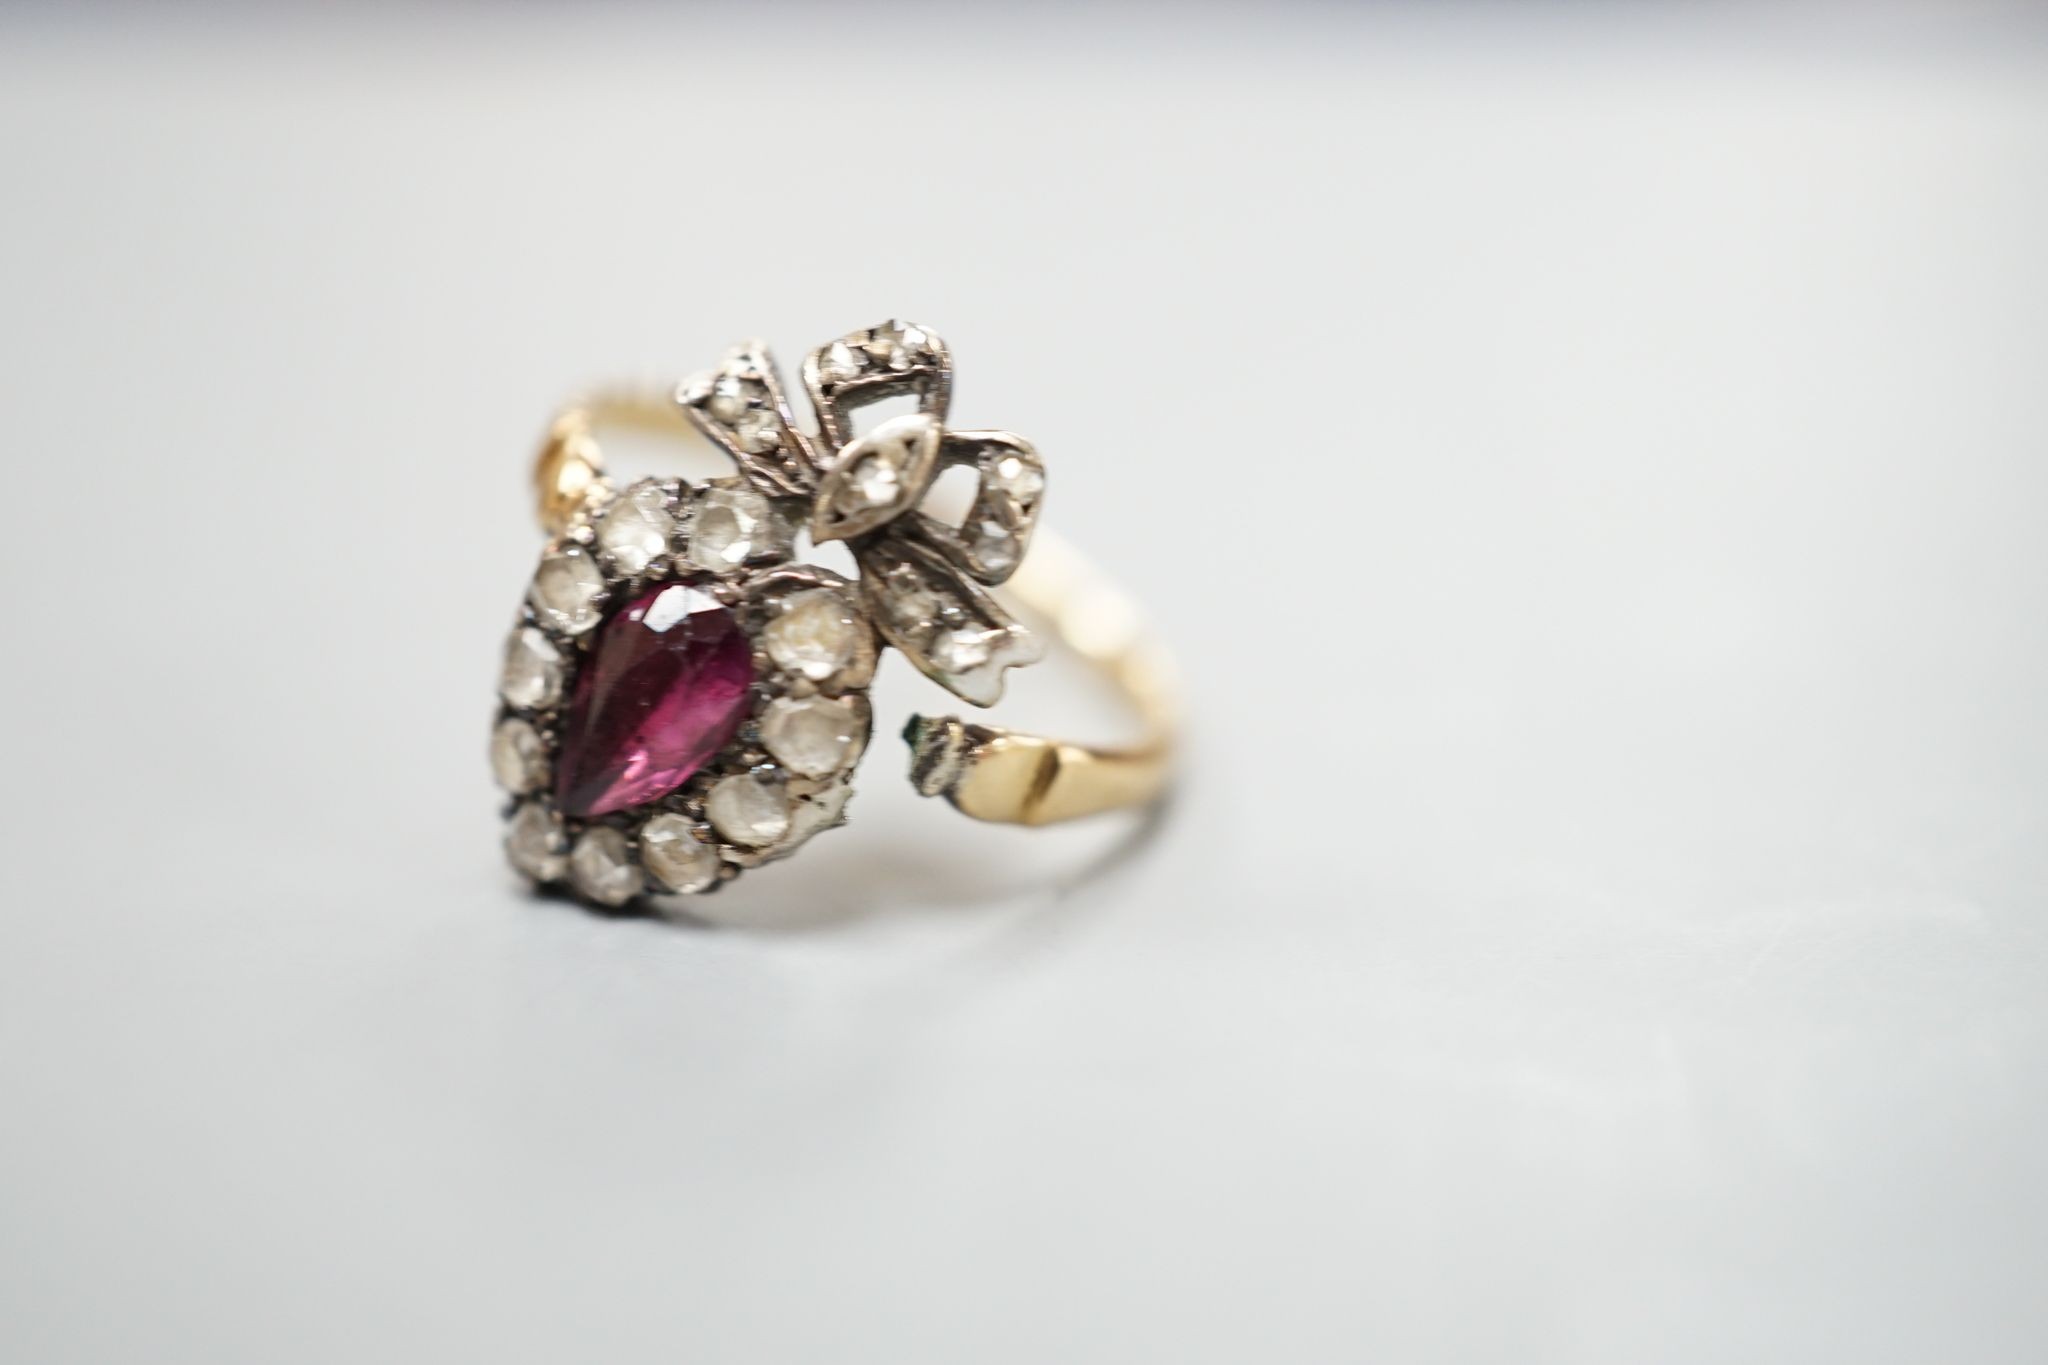 A 19th century yellow metal, garnet and rose cut diamond set heart shaped ring, with ribbon bow crest (shank broken), approx. size H, gross weight 2.2 grams.